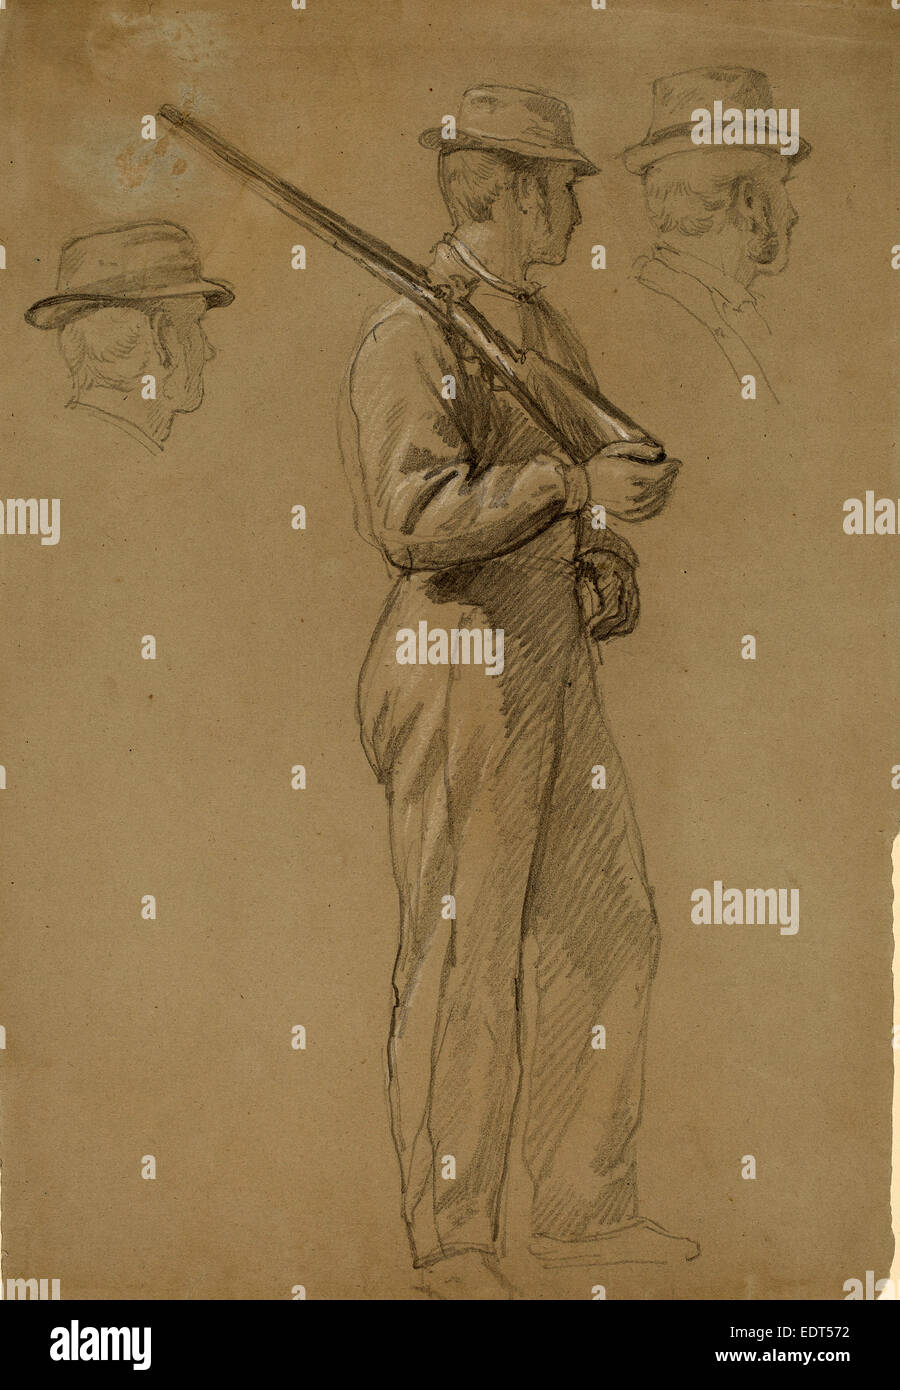 Daniel Huntington, Recruit; Two Studies of Heads, American, 1816 - 1906, c. 1862, graphite touched with white chalk Stock Photo